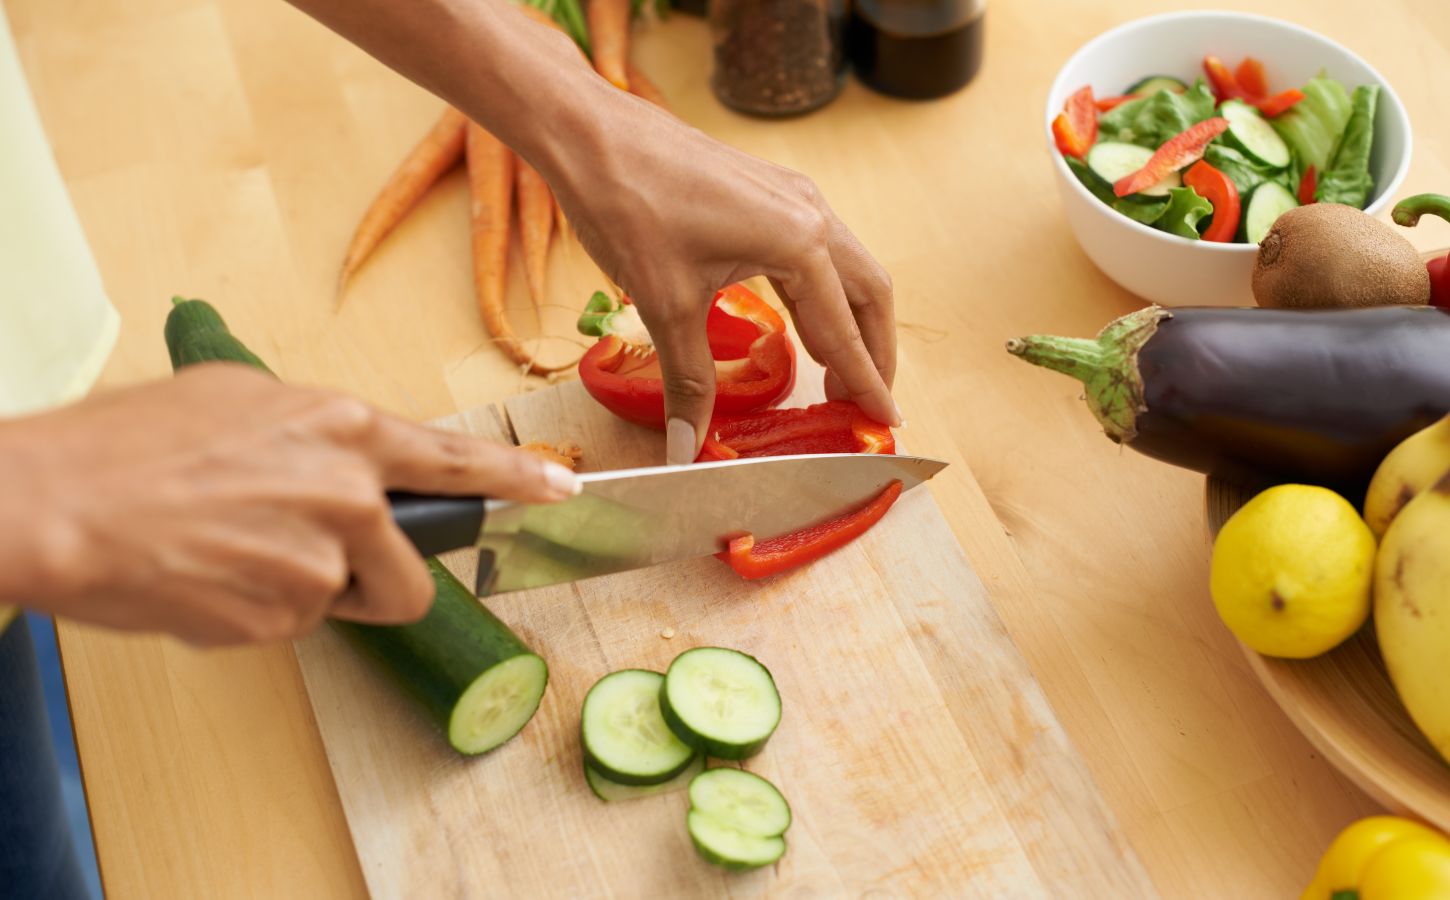 Photo shows someone's hands as they prepare fresh vegetables and produce with a knife on a wooden chopping board